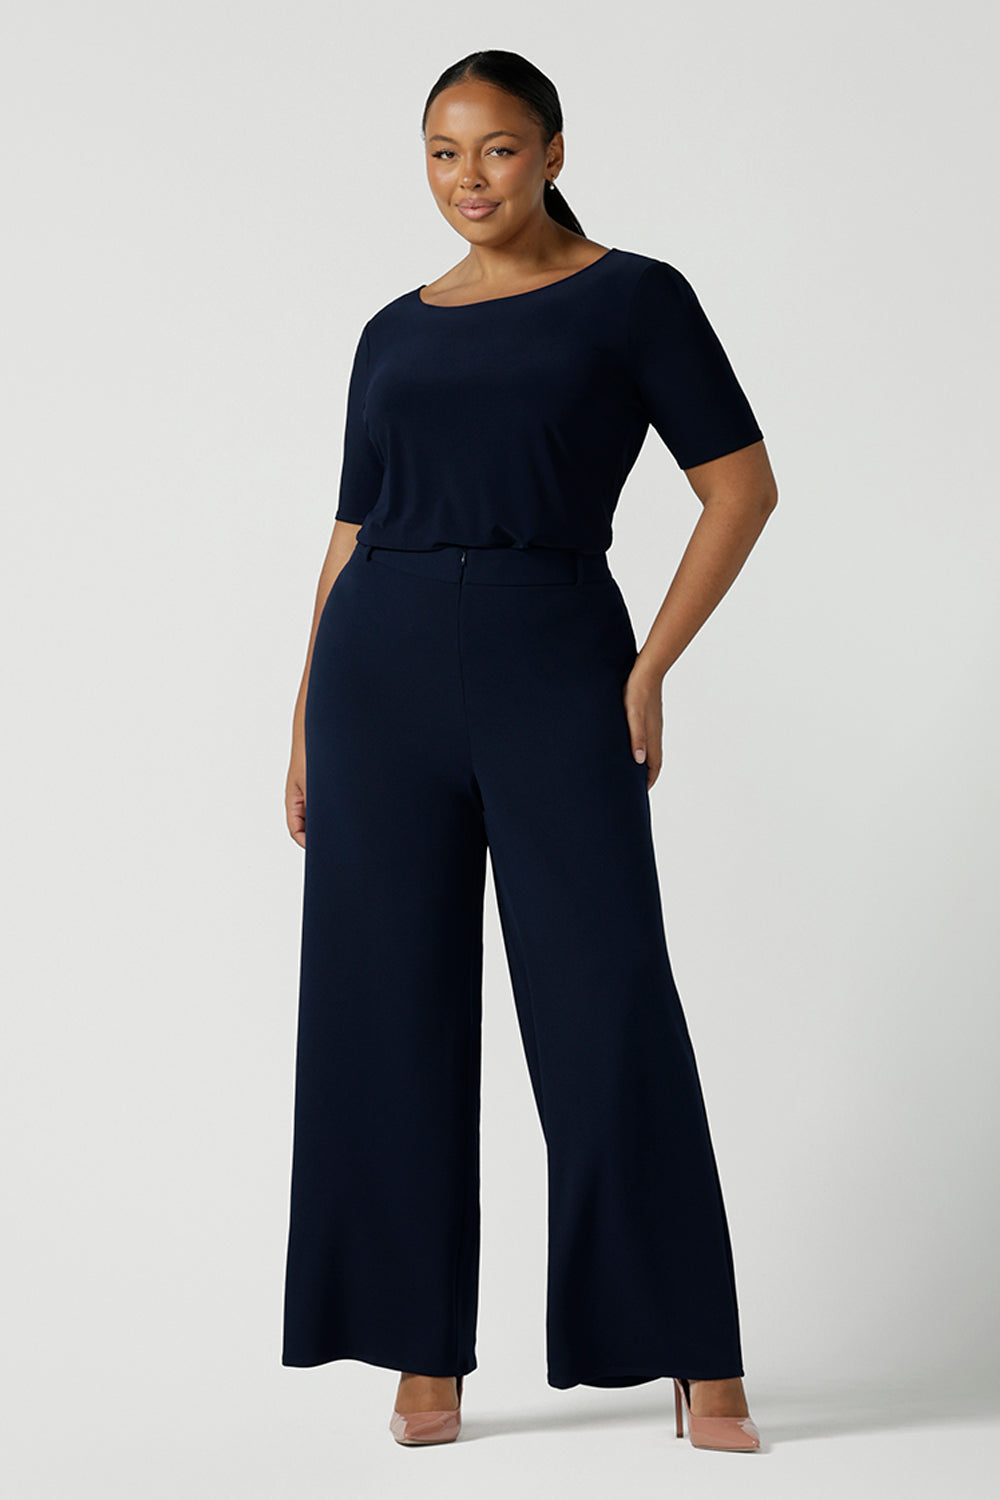 Size 10 model wears the Navy wide leg pant with navy scuba crepe. High waisted and tailored with belt loops. Stylish and corporate workwear for women size 8 - 24.. Made in Australia.